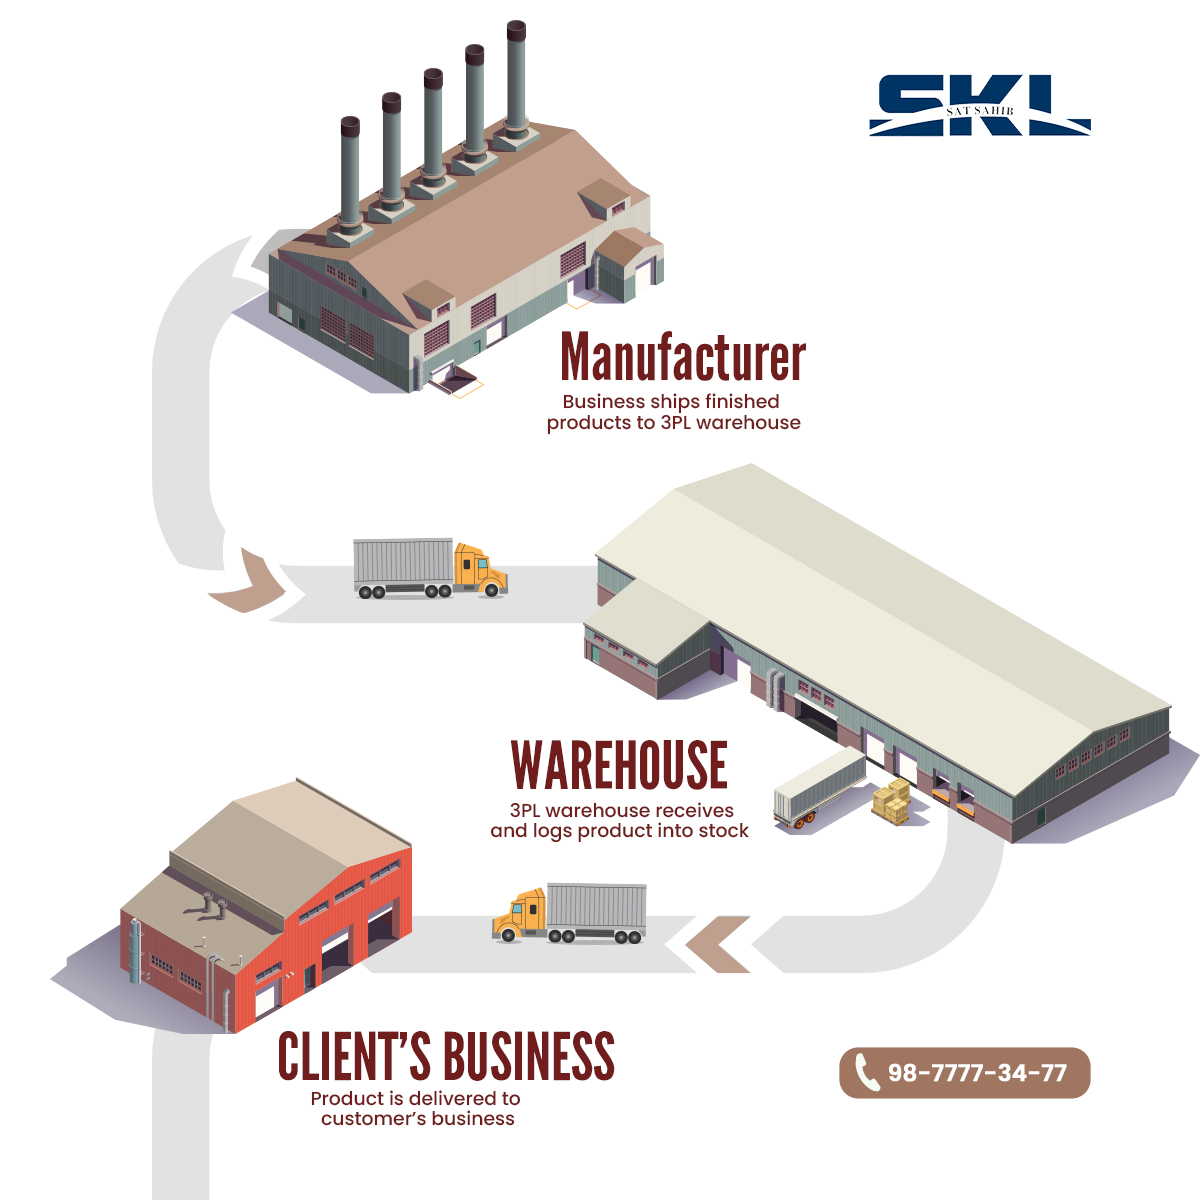 Our 3PL service offers flexible solutions tailored to your needs, ensuring smooth operations and cost-effectiveness.
.
.
#satkabirlogistics #logistics #logisticssolutions #logisticservices #CostEfficient #LogisticsExcellence #3pllogistics #3PL #sklgroup #warehouse